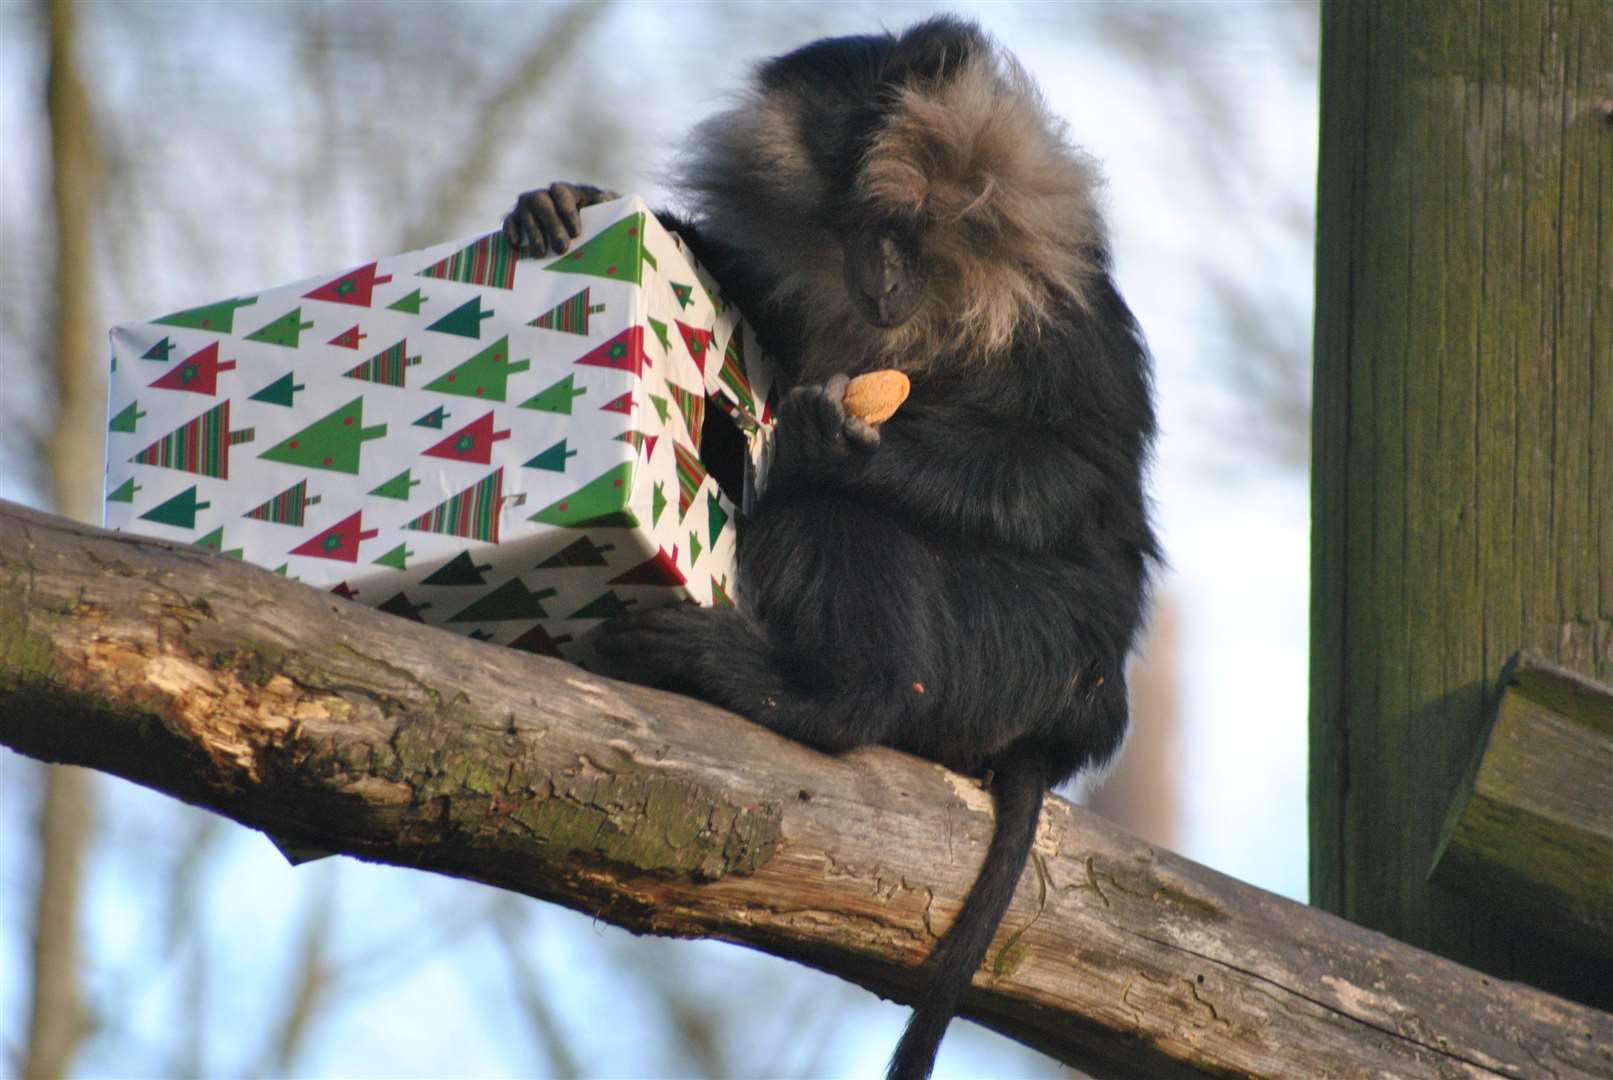 A macaque enjoys his Christmas present at Howletts in 2017. Credit: The Aspinall Foundation/David Rolfe